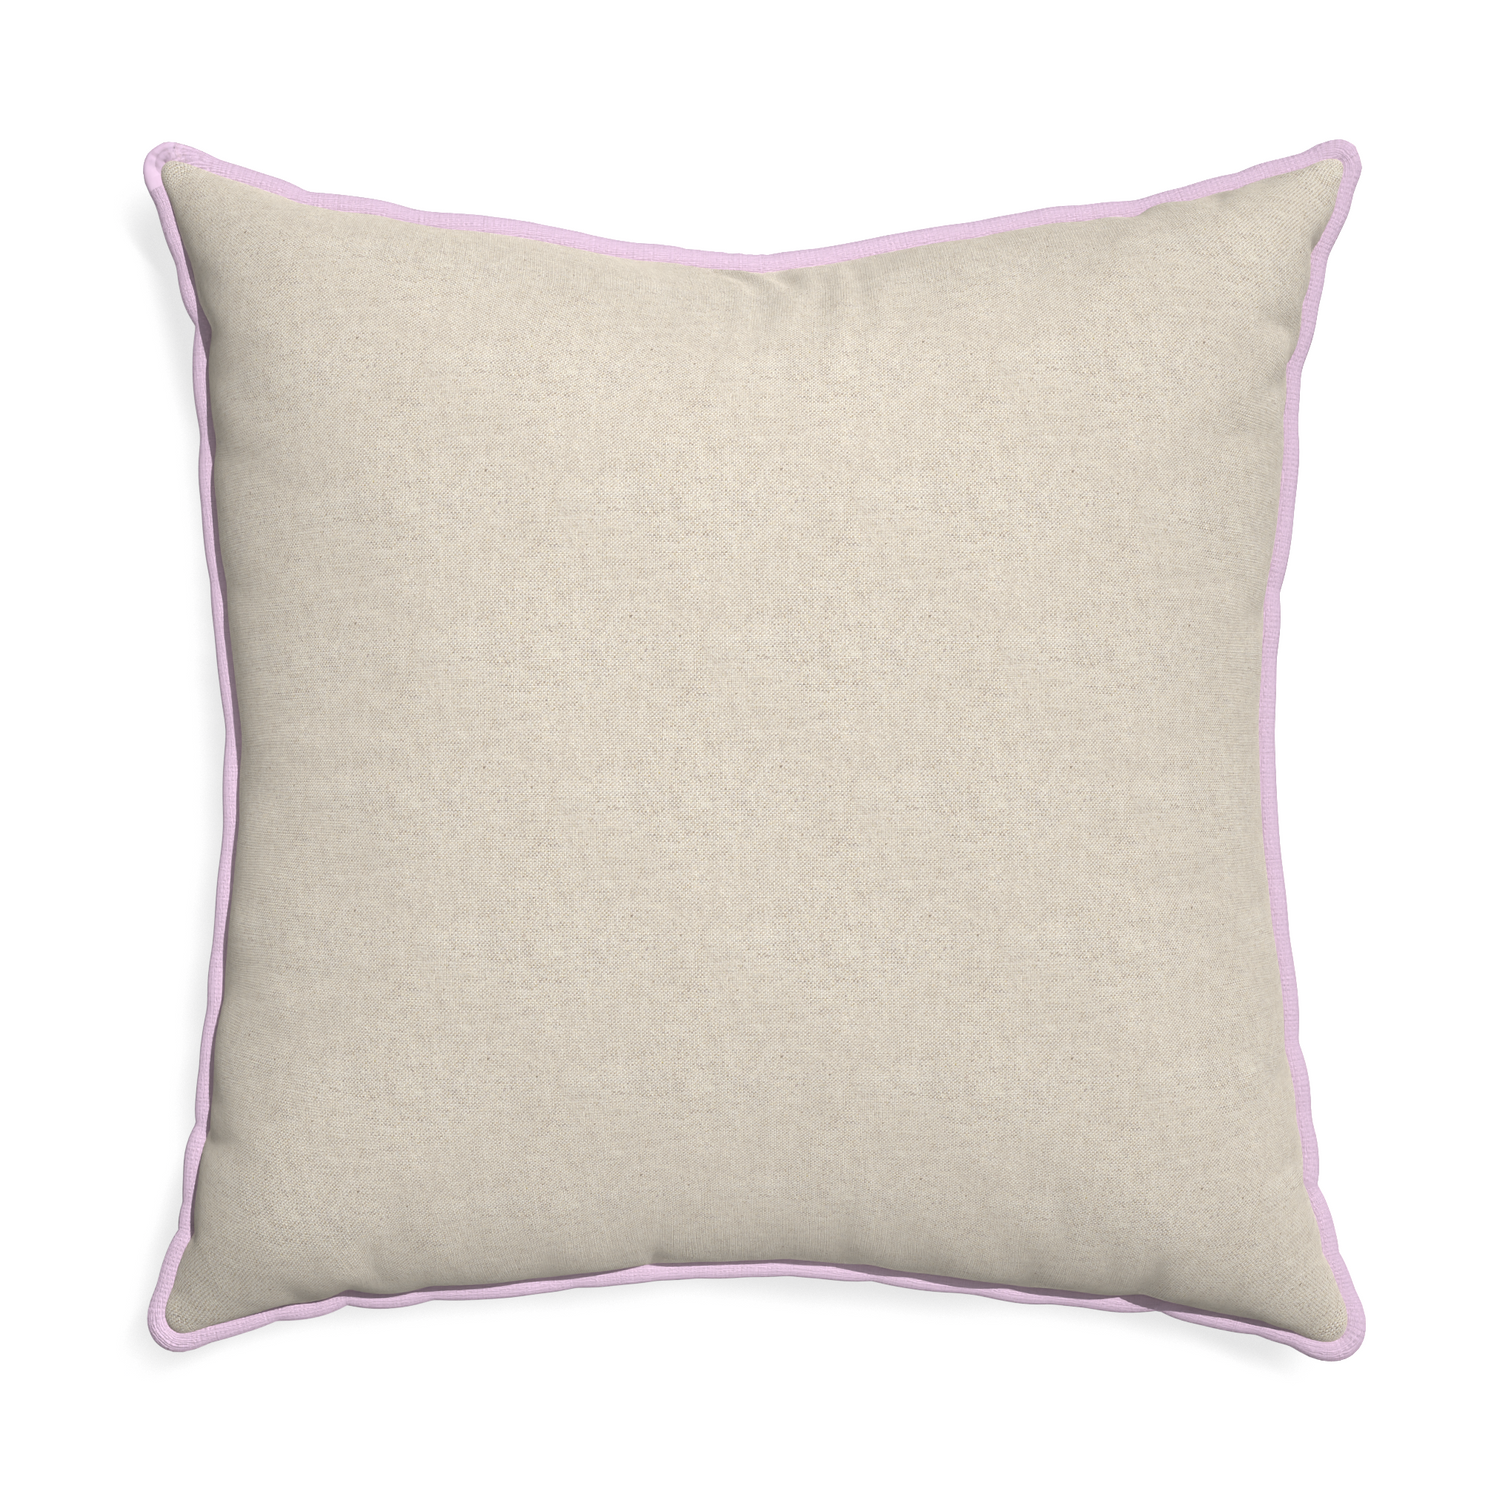 Euro-sham oat custom light brownpillow with l piping on white background